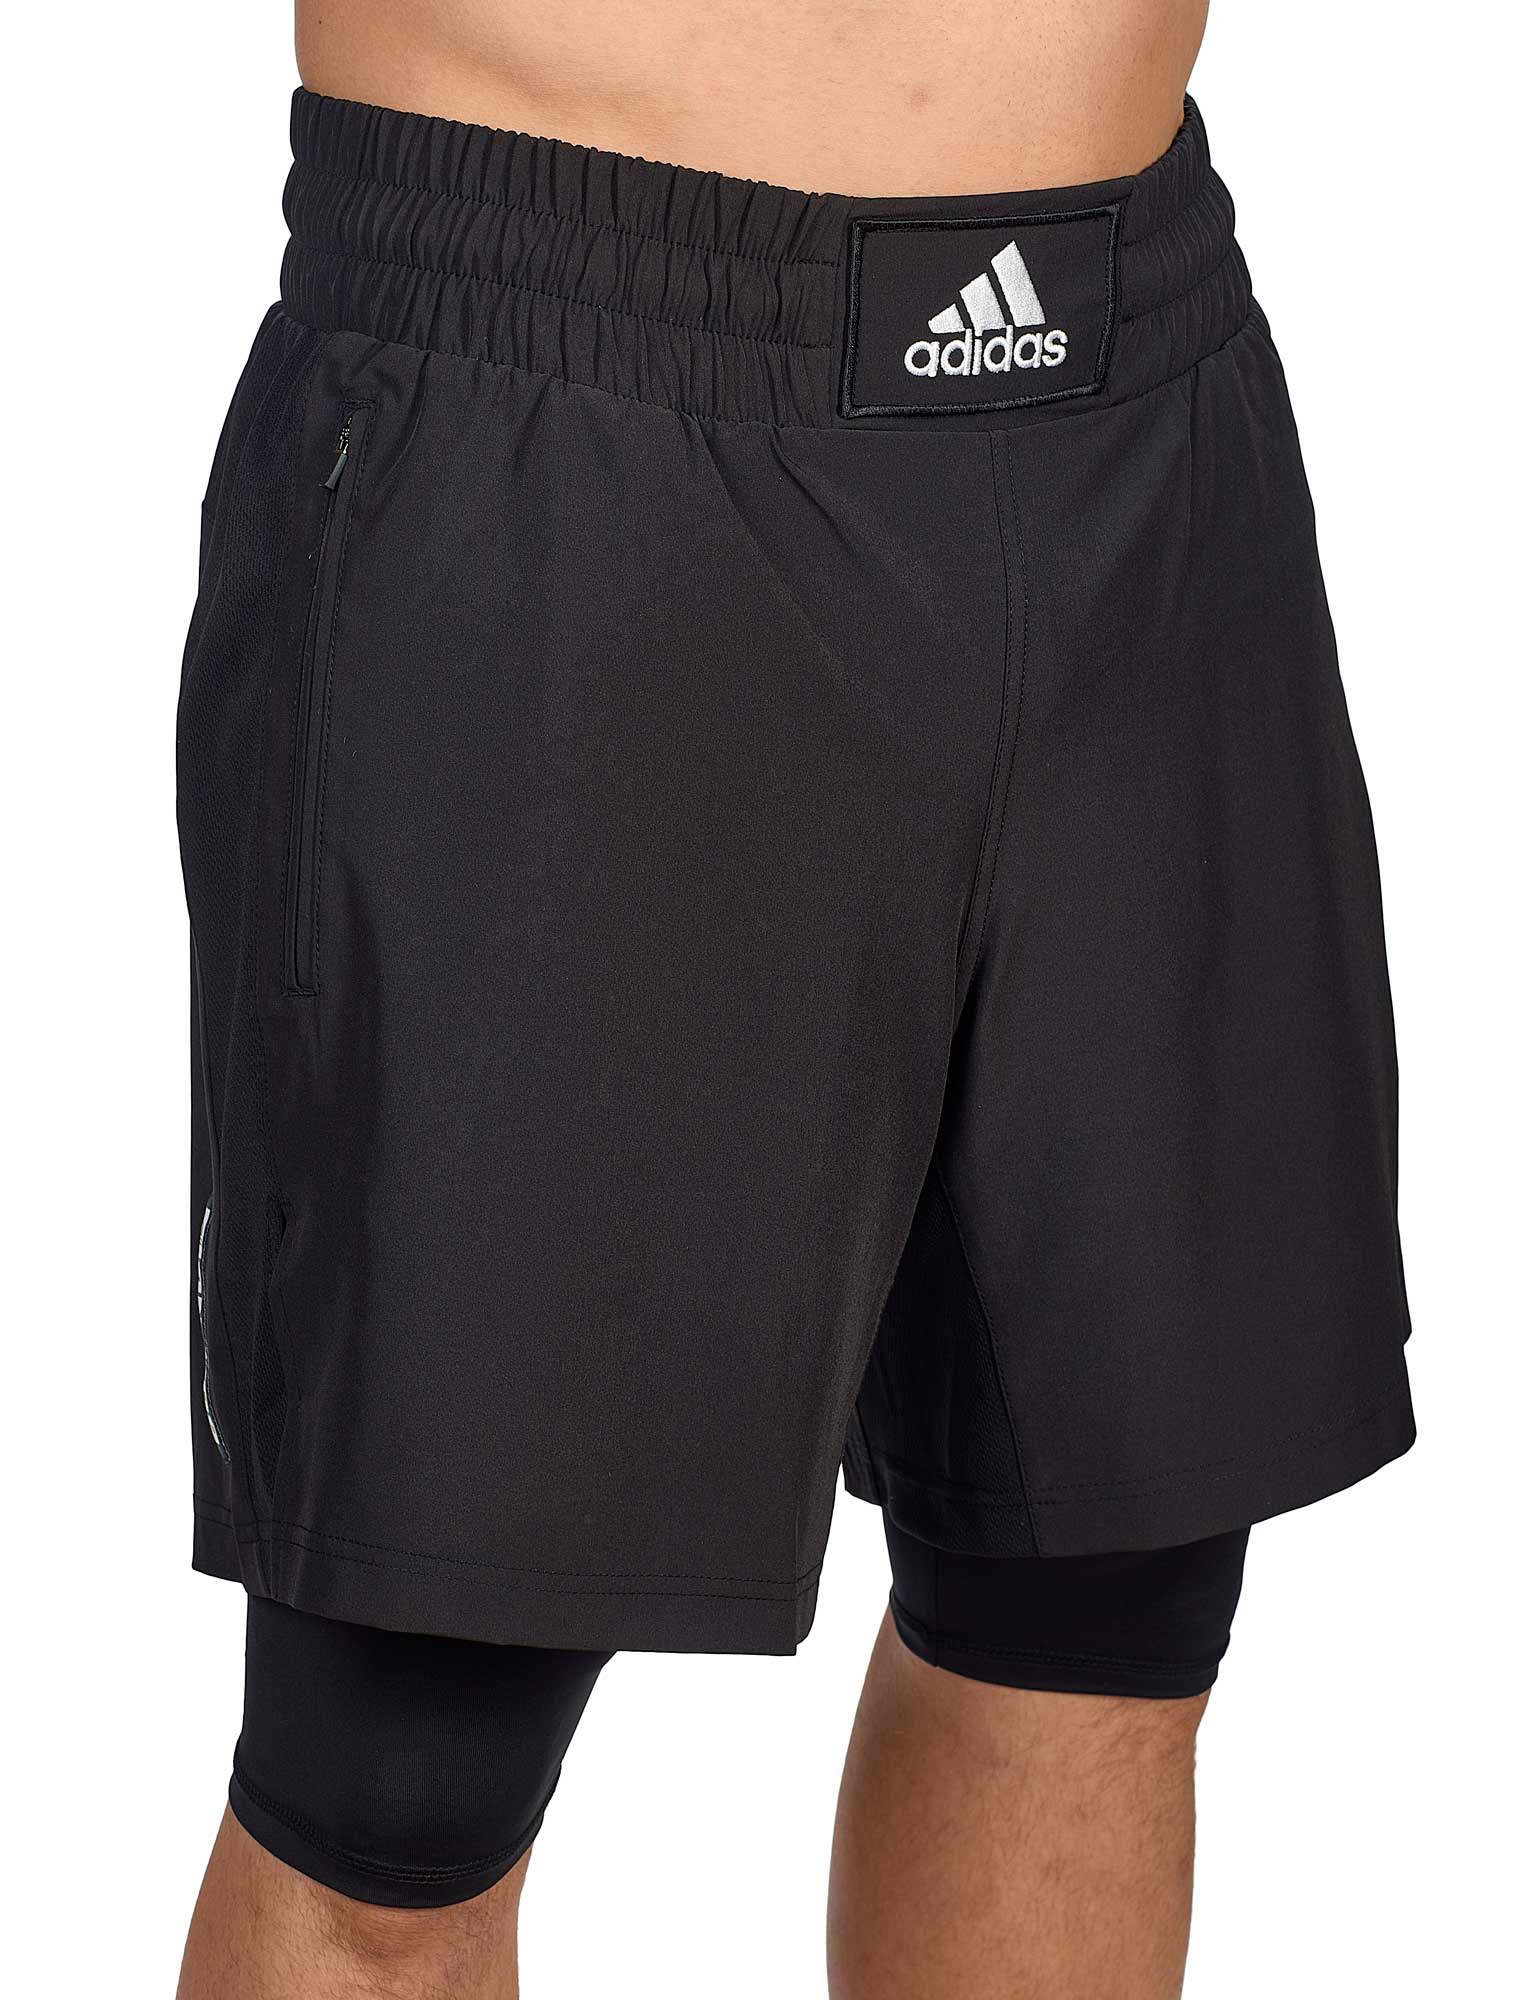 adidas boxing wear tech shorts with tights BXWTSH02